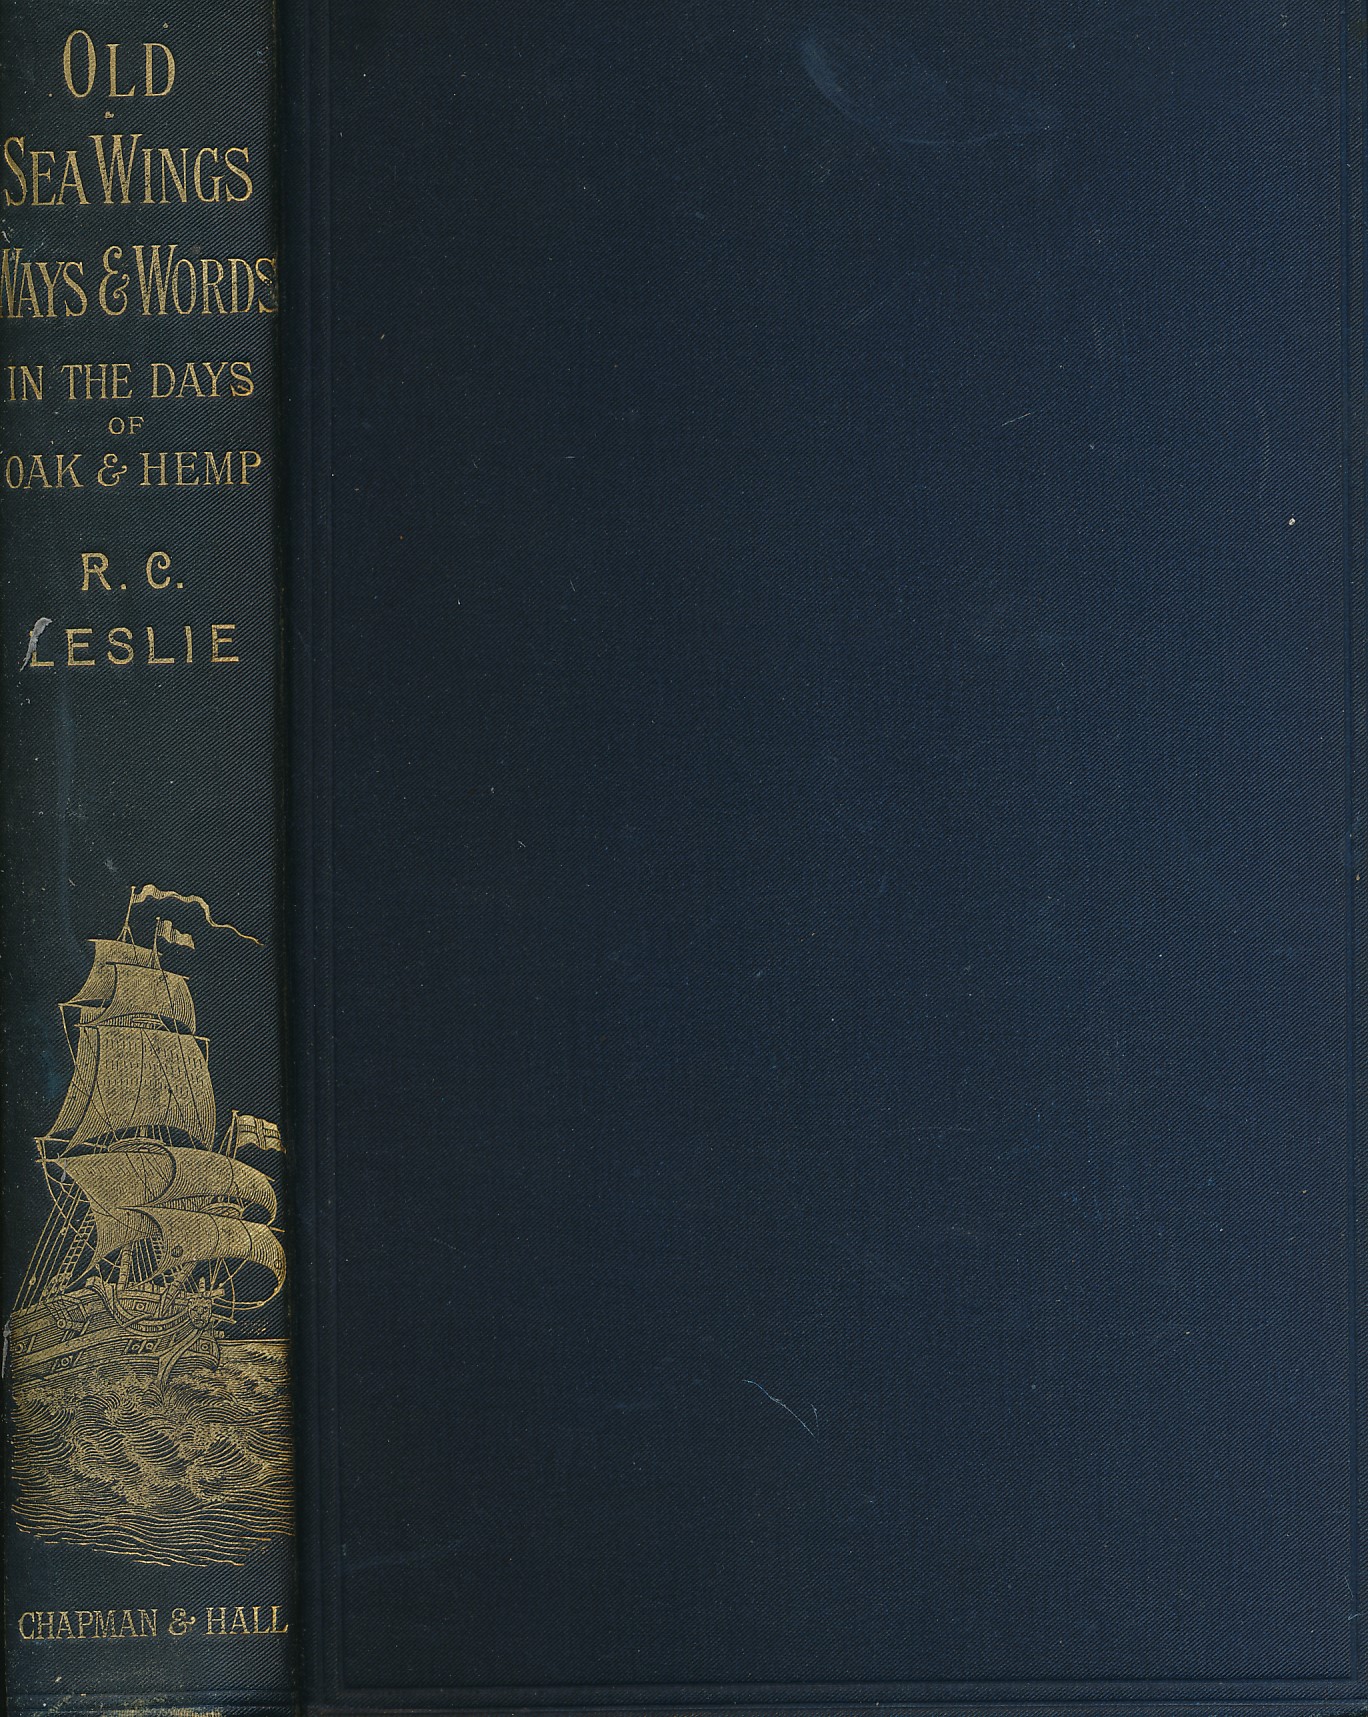 LESLIE, ROBERT C - Old Sea Wings, Ways, and Words, in the Days of Oak and Hemp